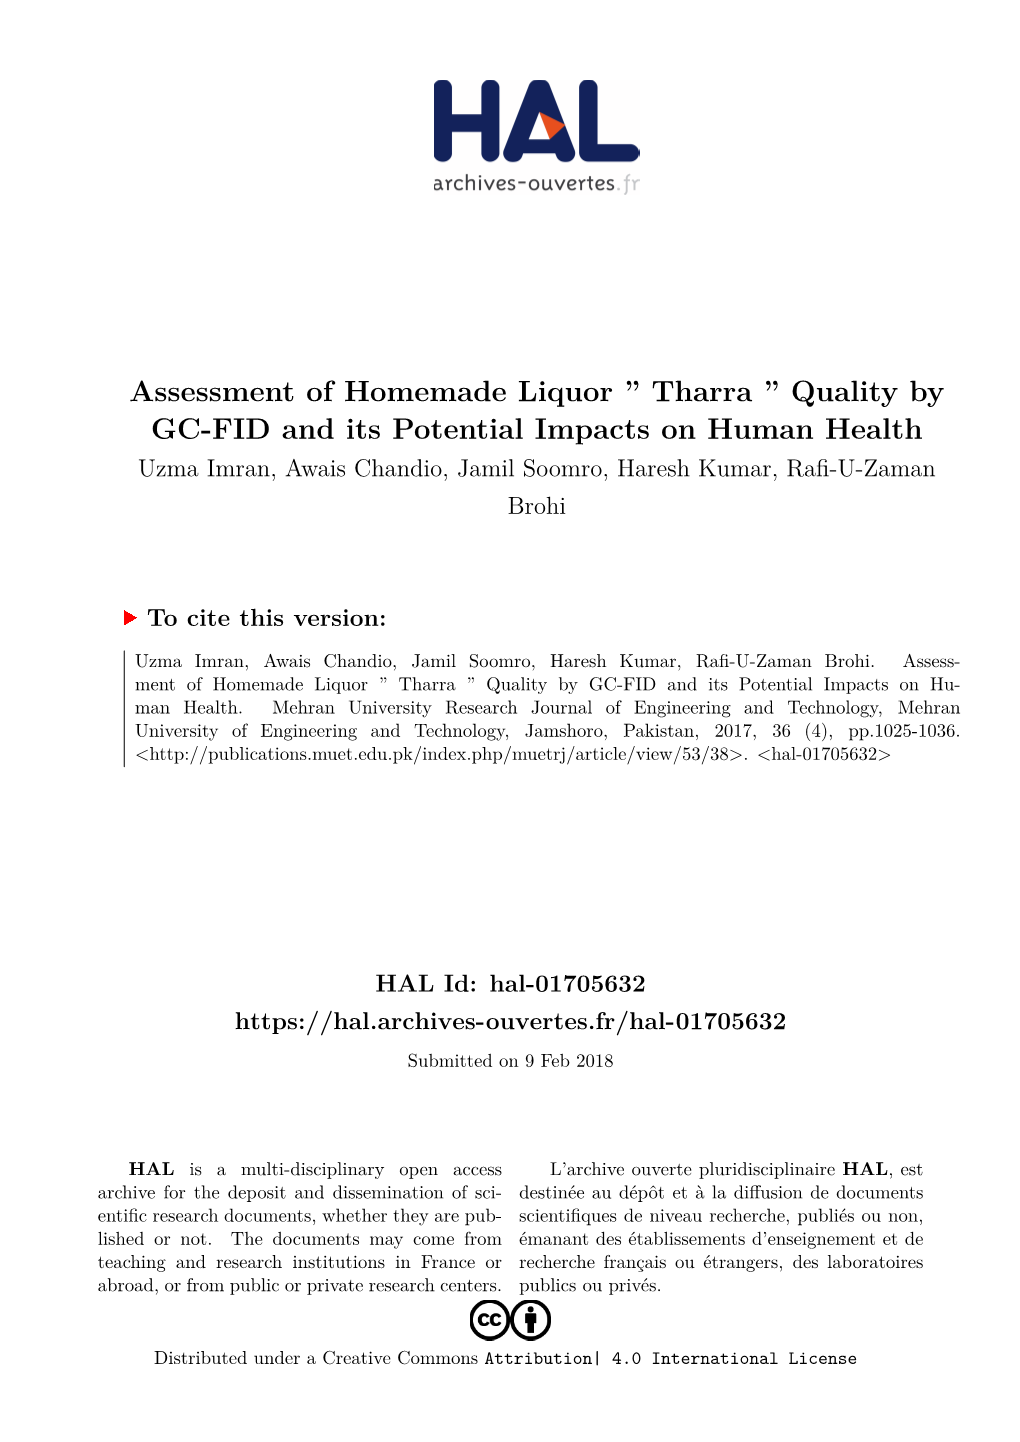 Assessment of Homemade Liquor “Tharra” Quality by GC-FID and Its Potential Impacts on Human Health